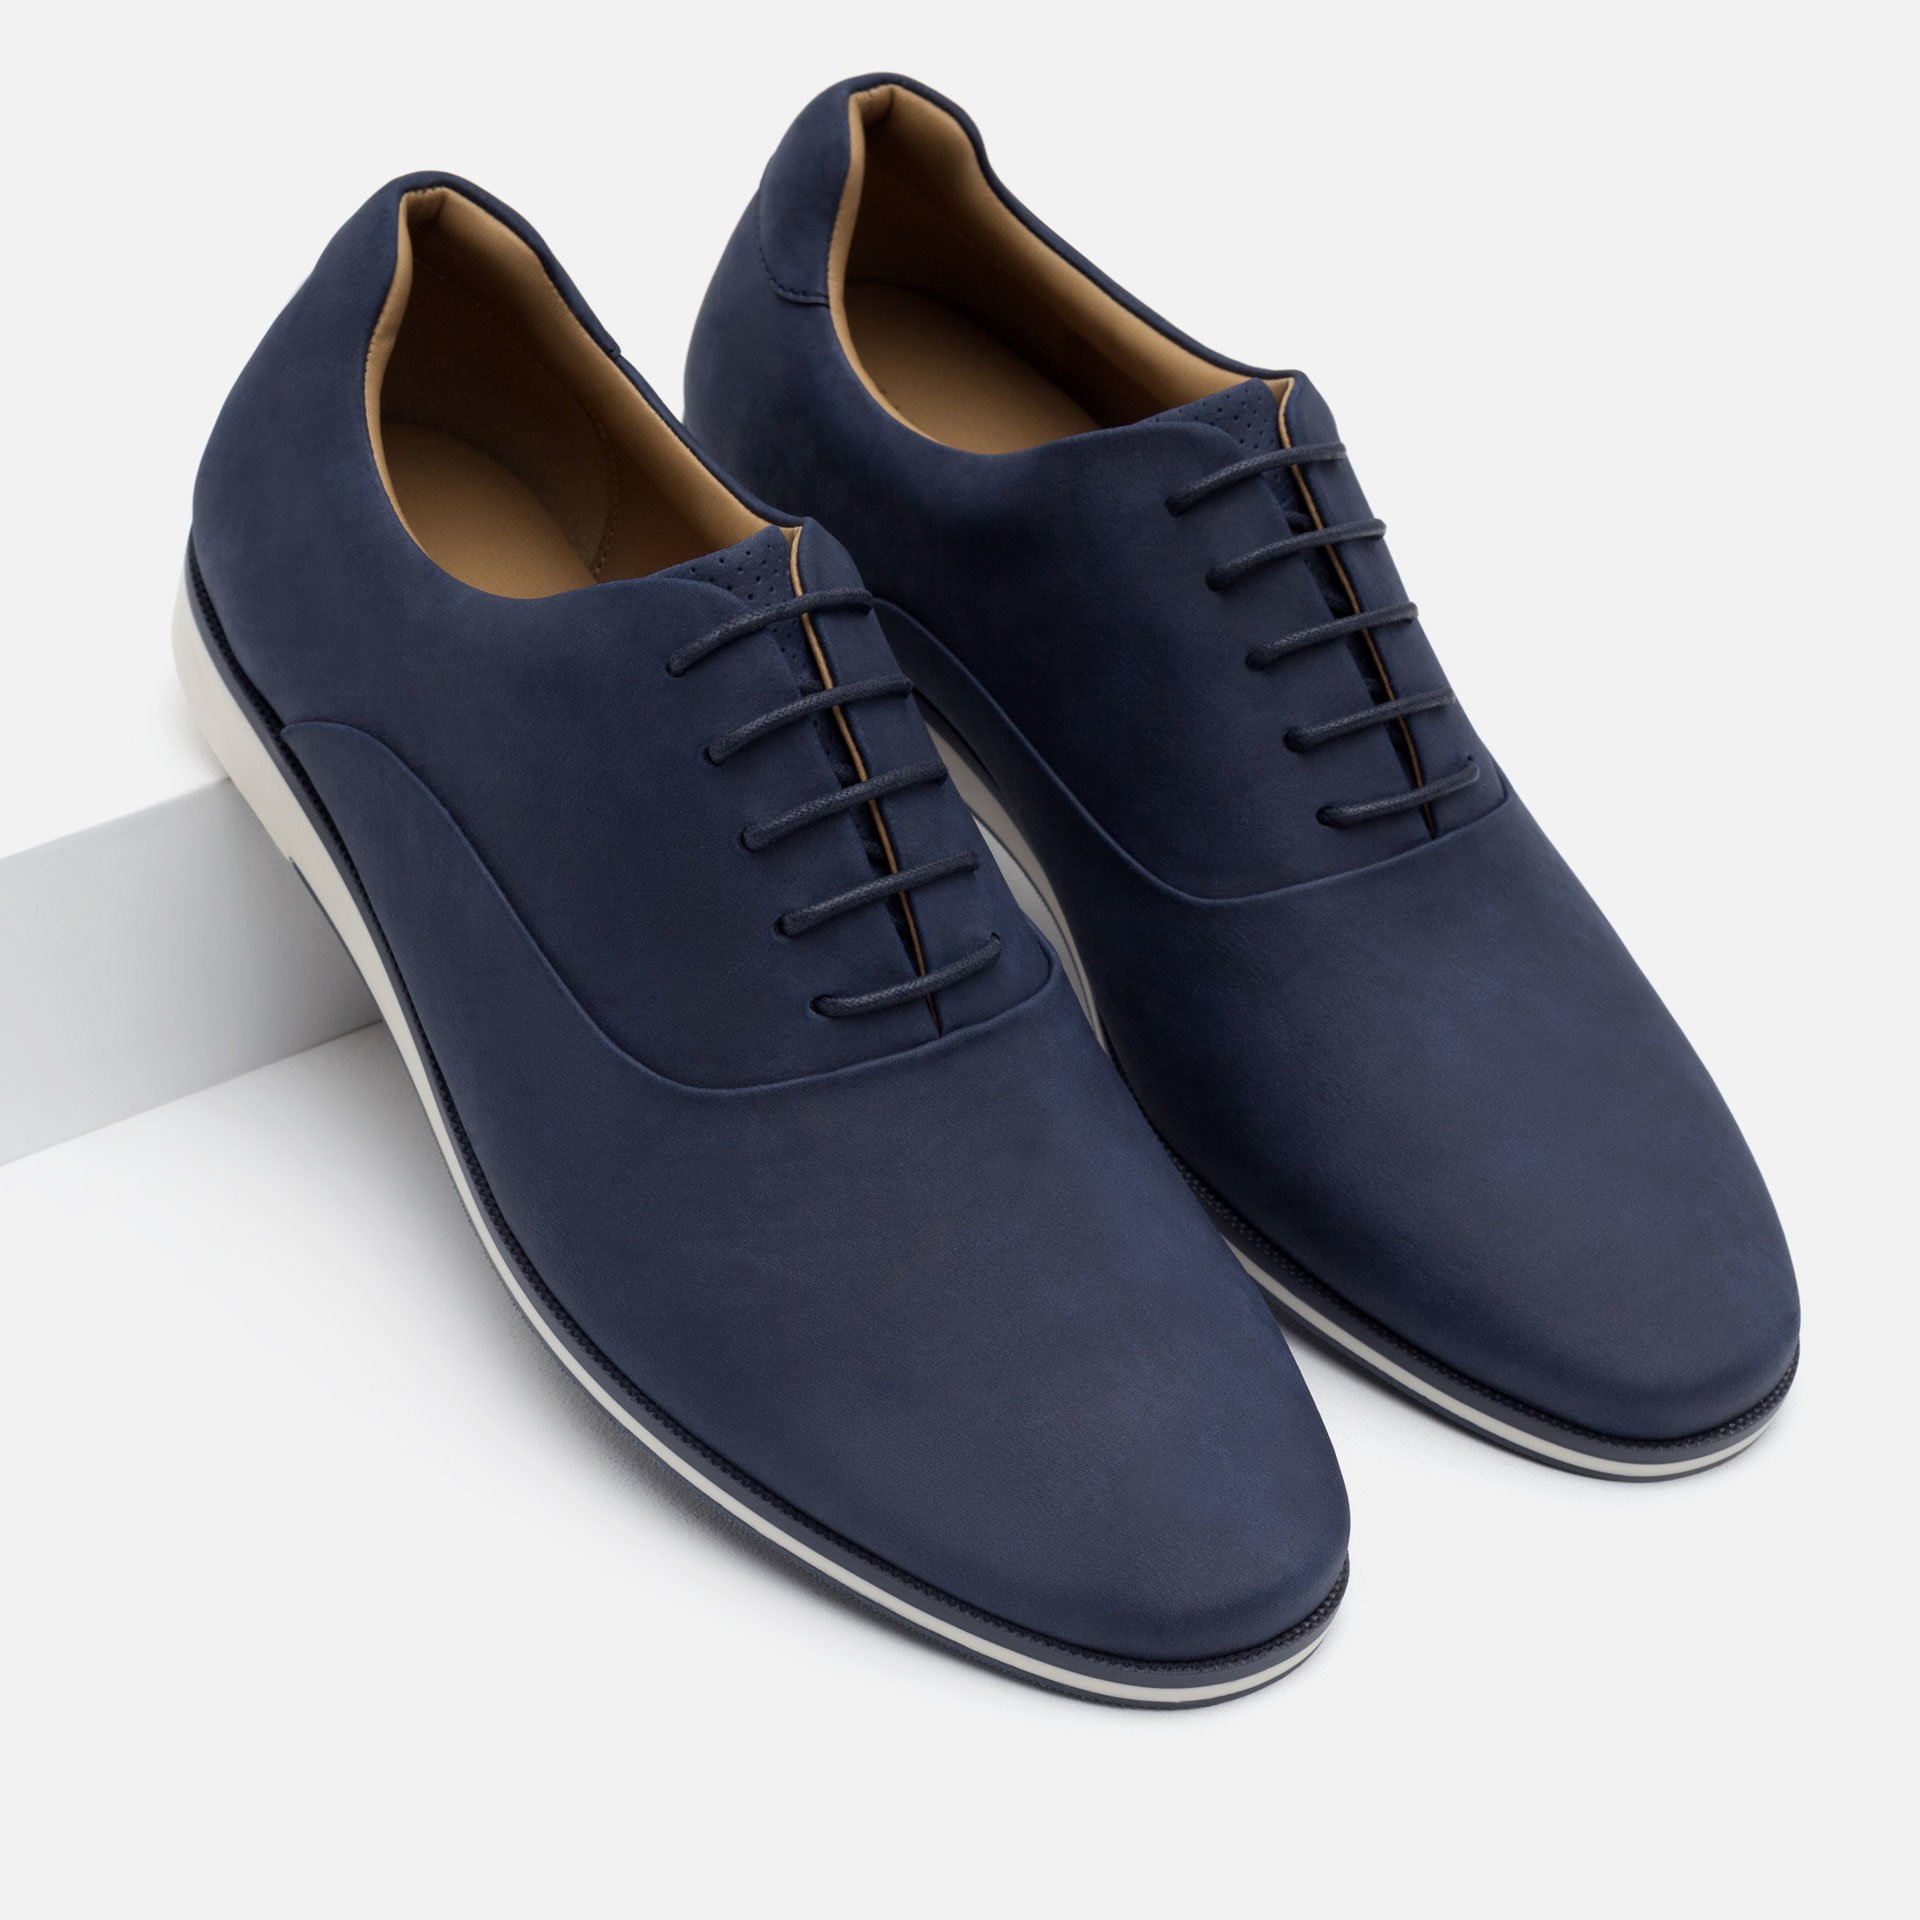  Zara  Faux Leather Oxford Shoes  in Blue for Men  Lyst